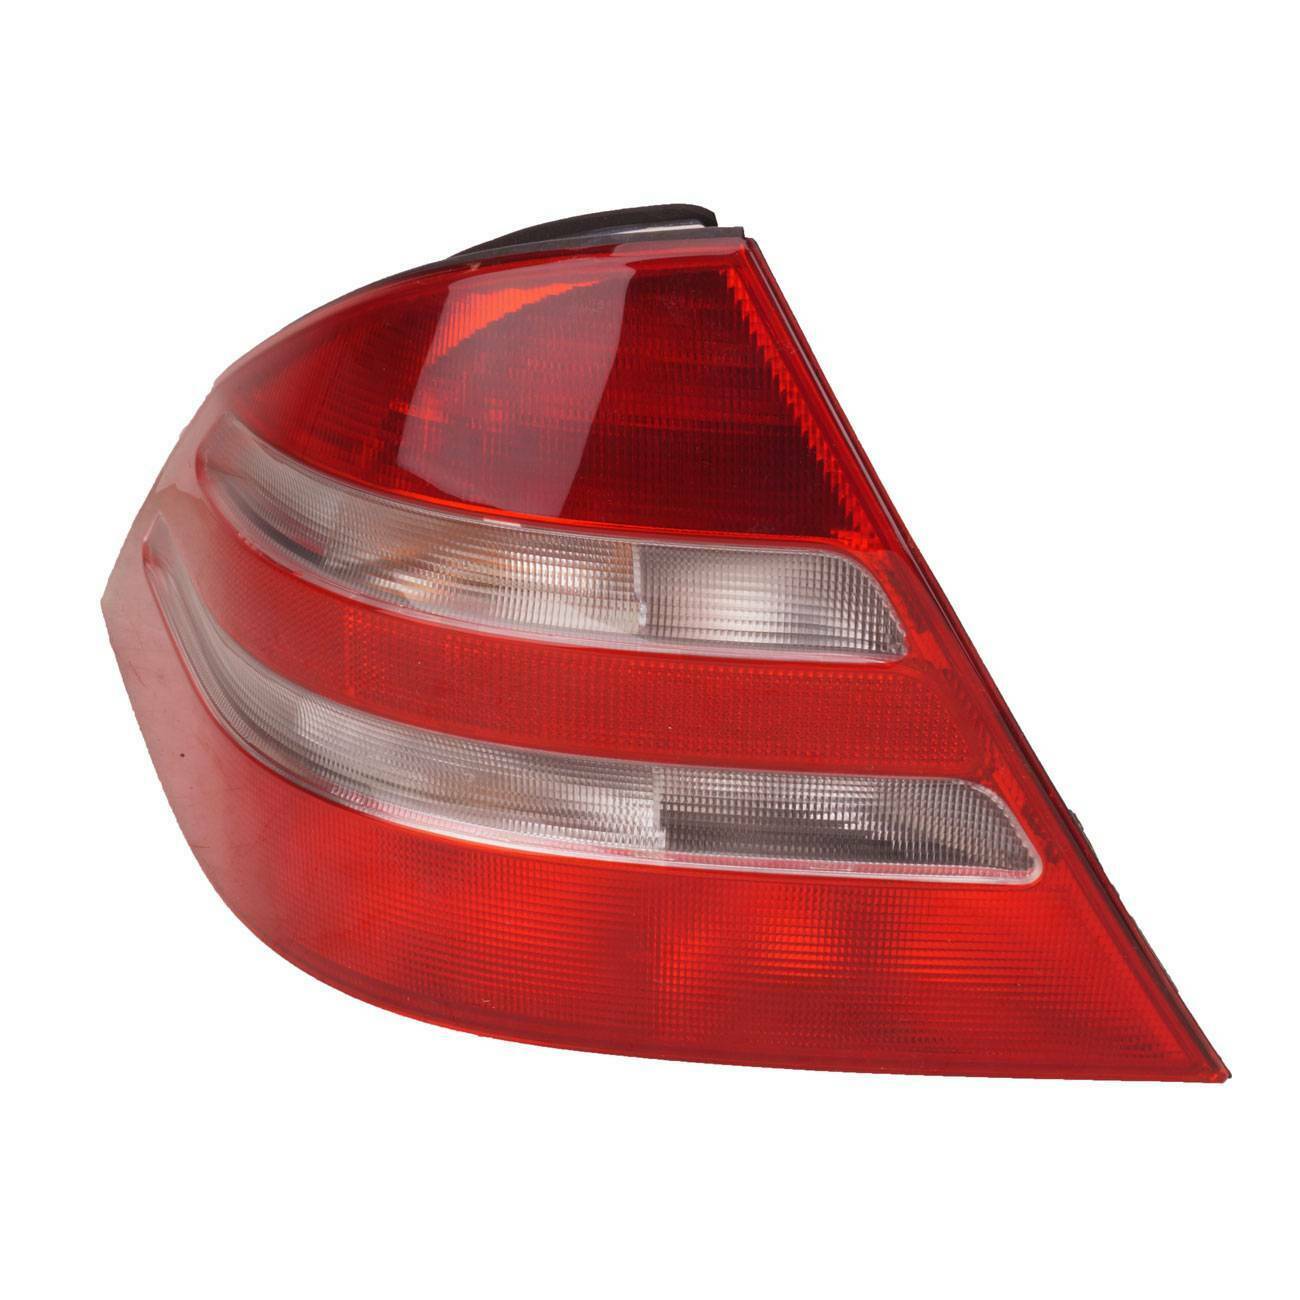 Left Assembled Tail Light for Mercedes W220 S320 6848-01(Slight scratches) German Made